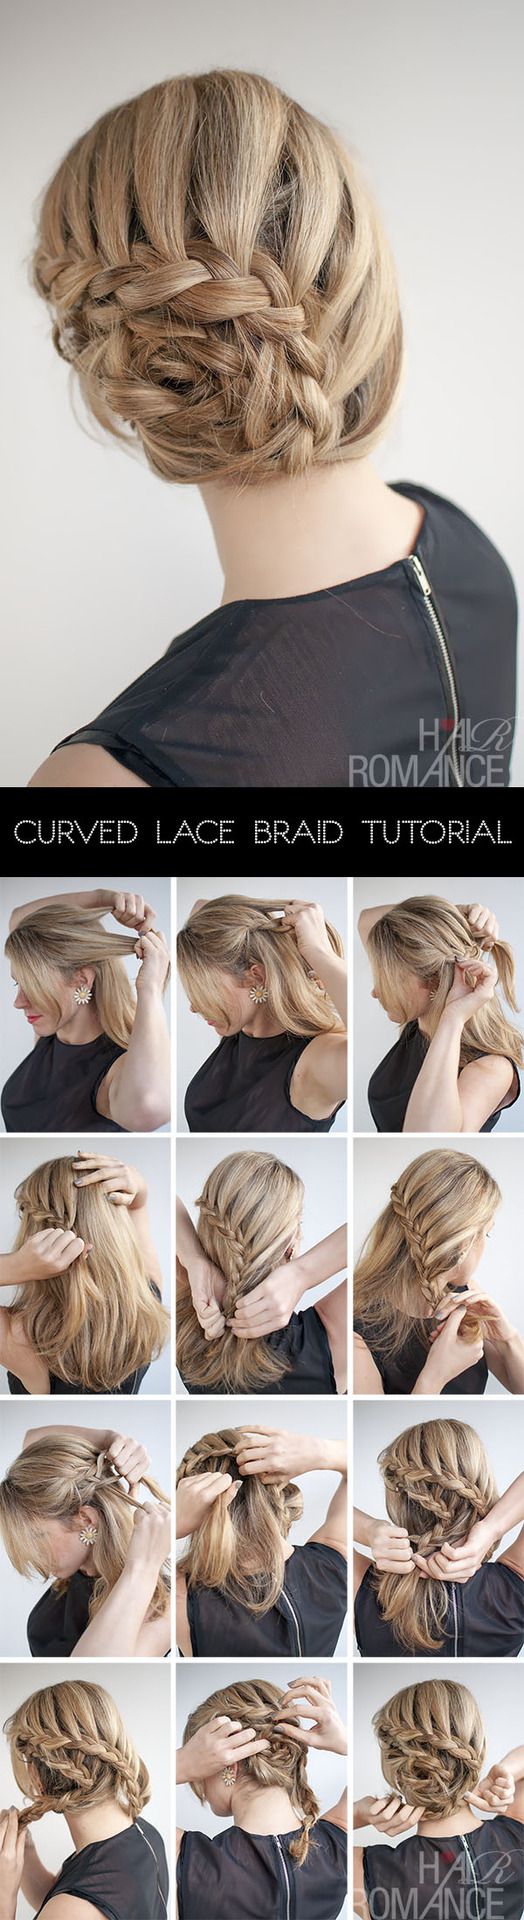 Curved Lace Braided Updo Hairstyle Tutorial